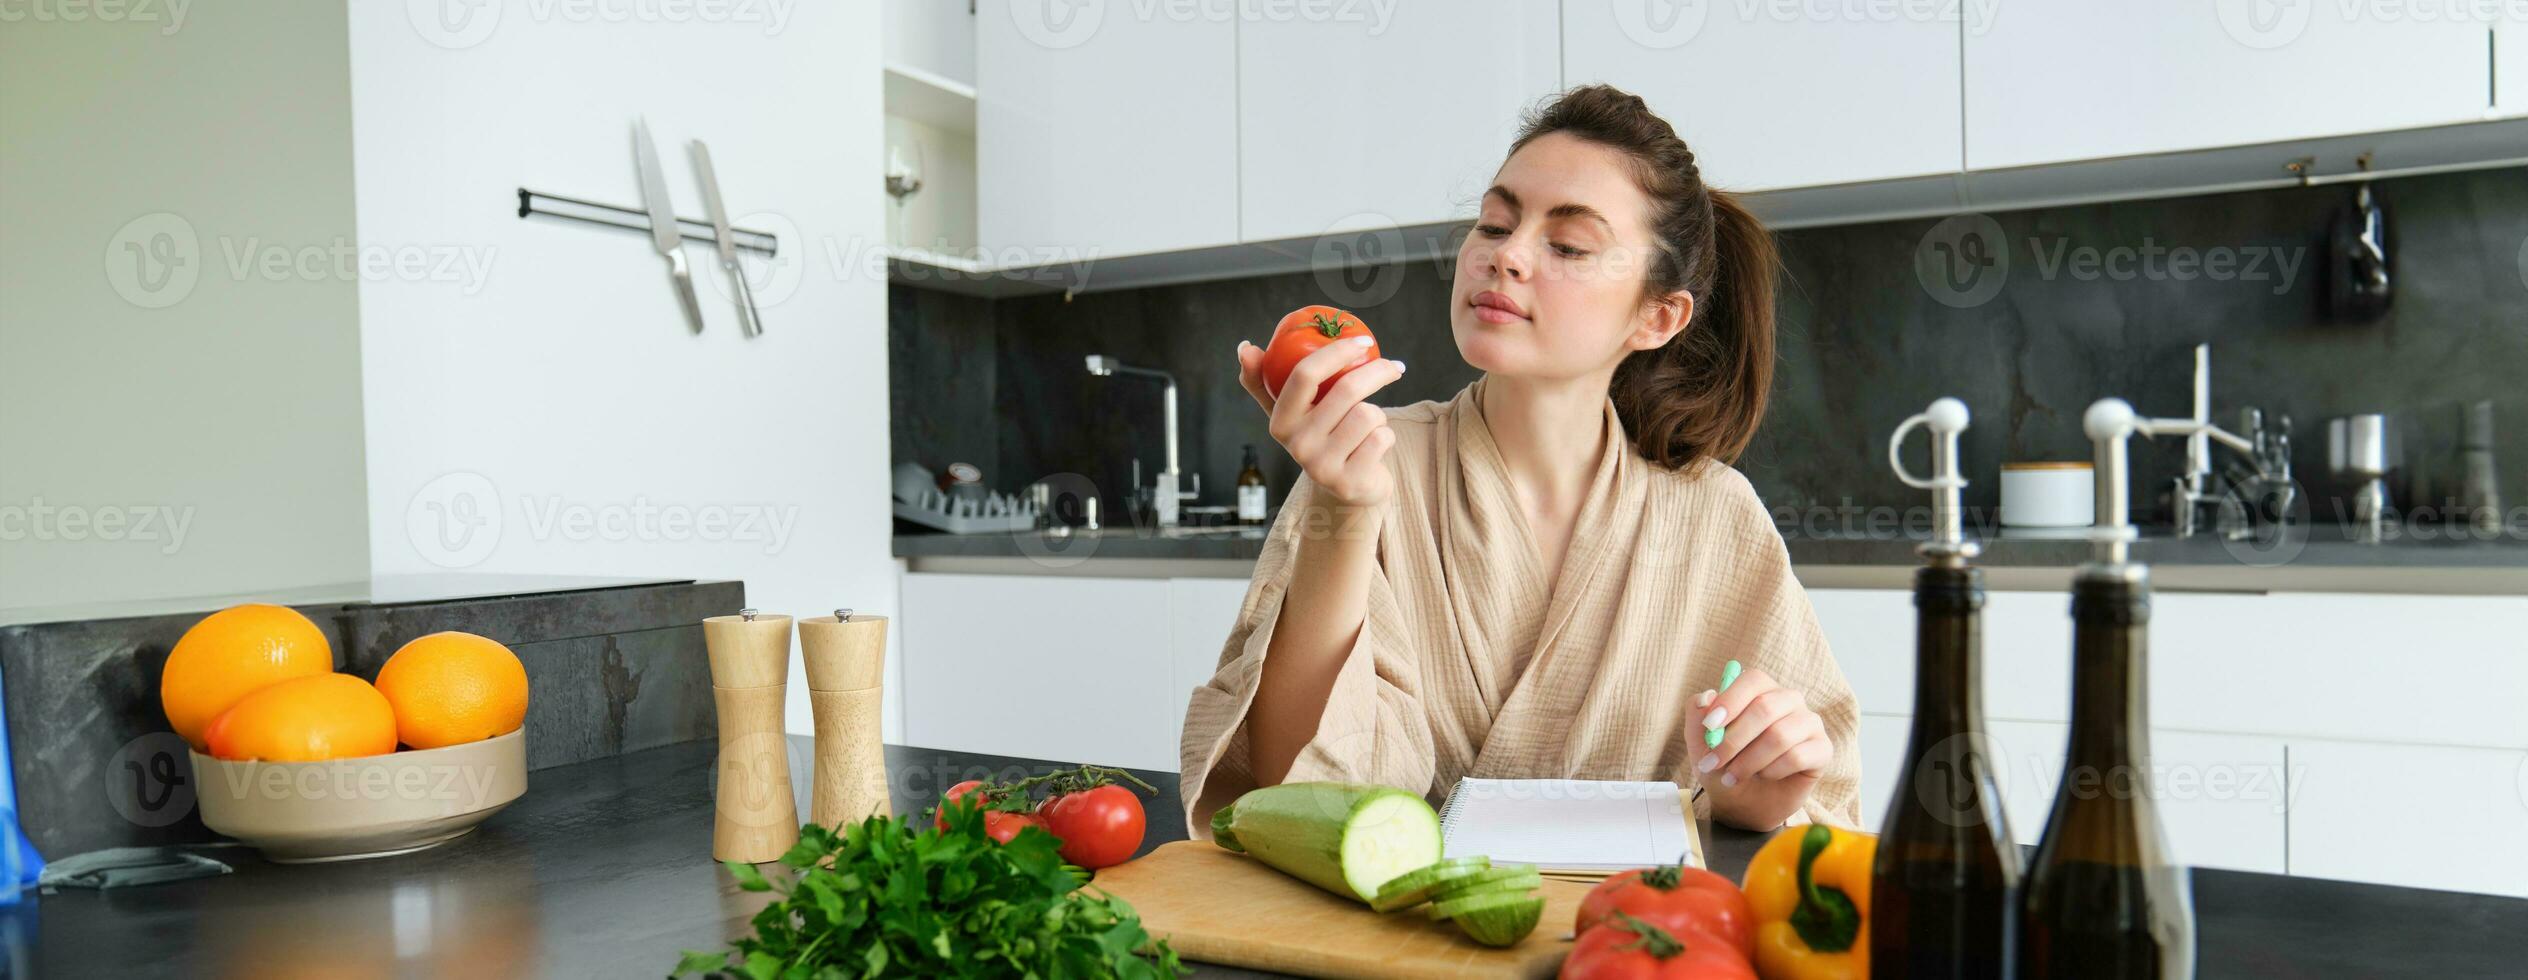 Portrait of beautiful smiling woman, writing her healthy menu, eating tomato while cooking, making grocery list, sitting in the kitchen photo